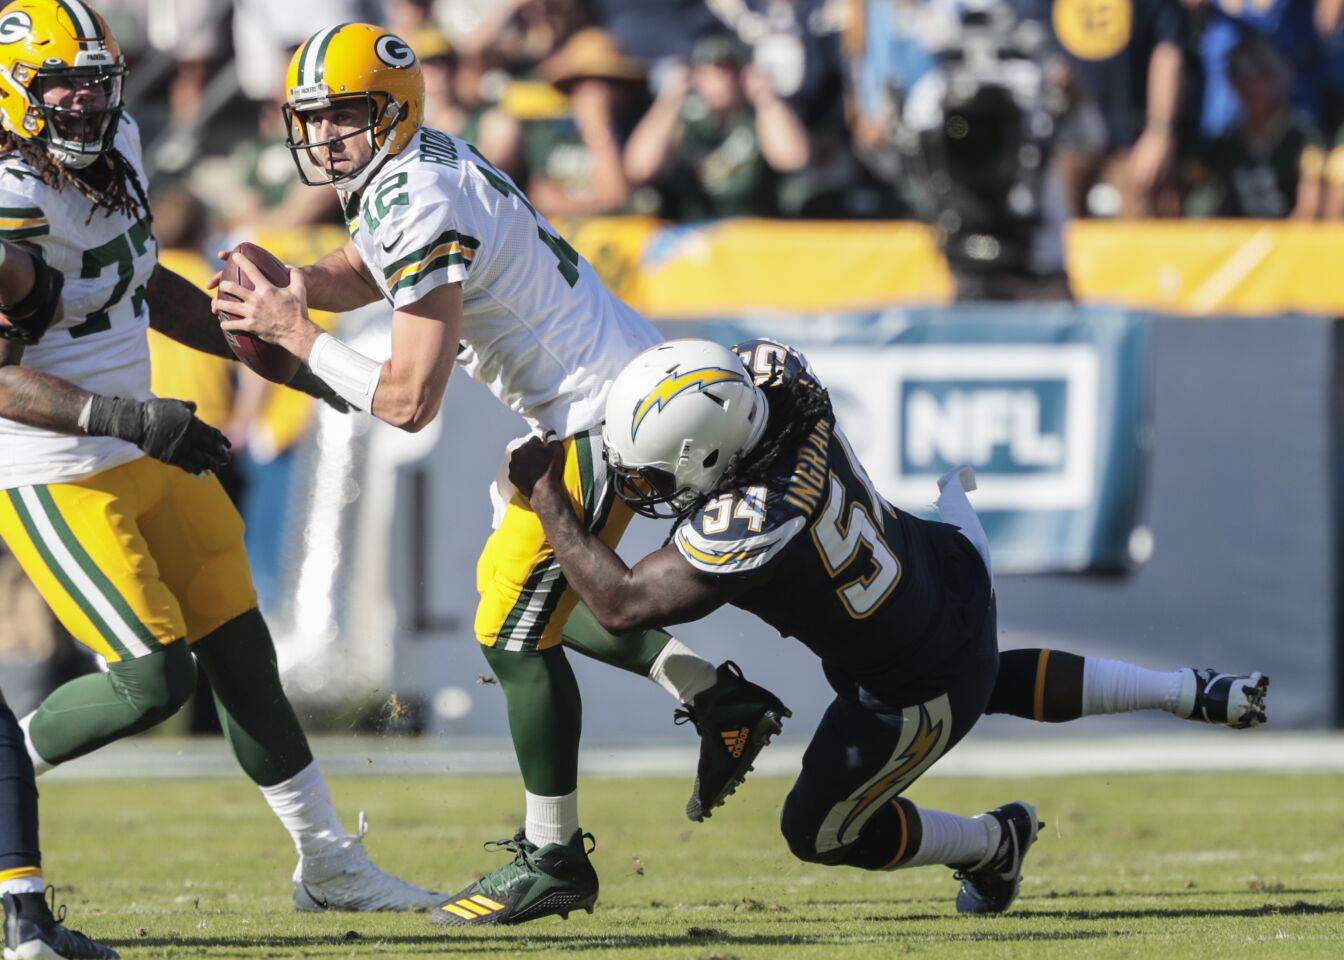 Chargers defensive end Melvin Ingram sacks Packers quarter Aaron Rodgers.